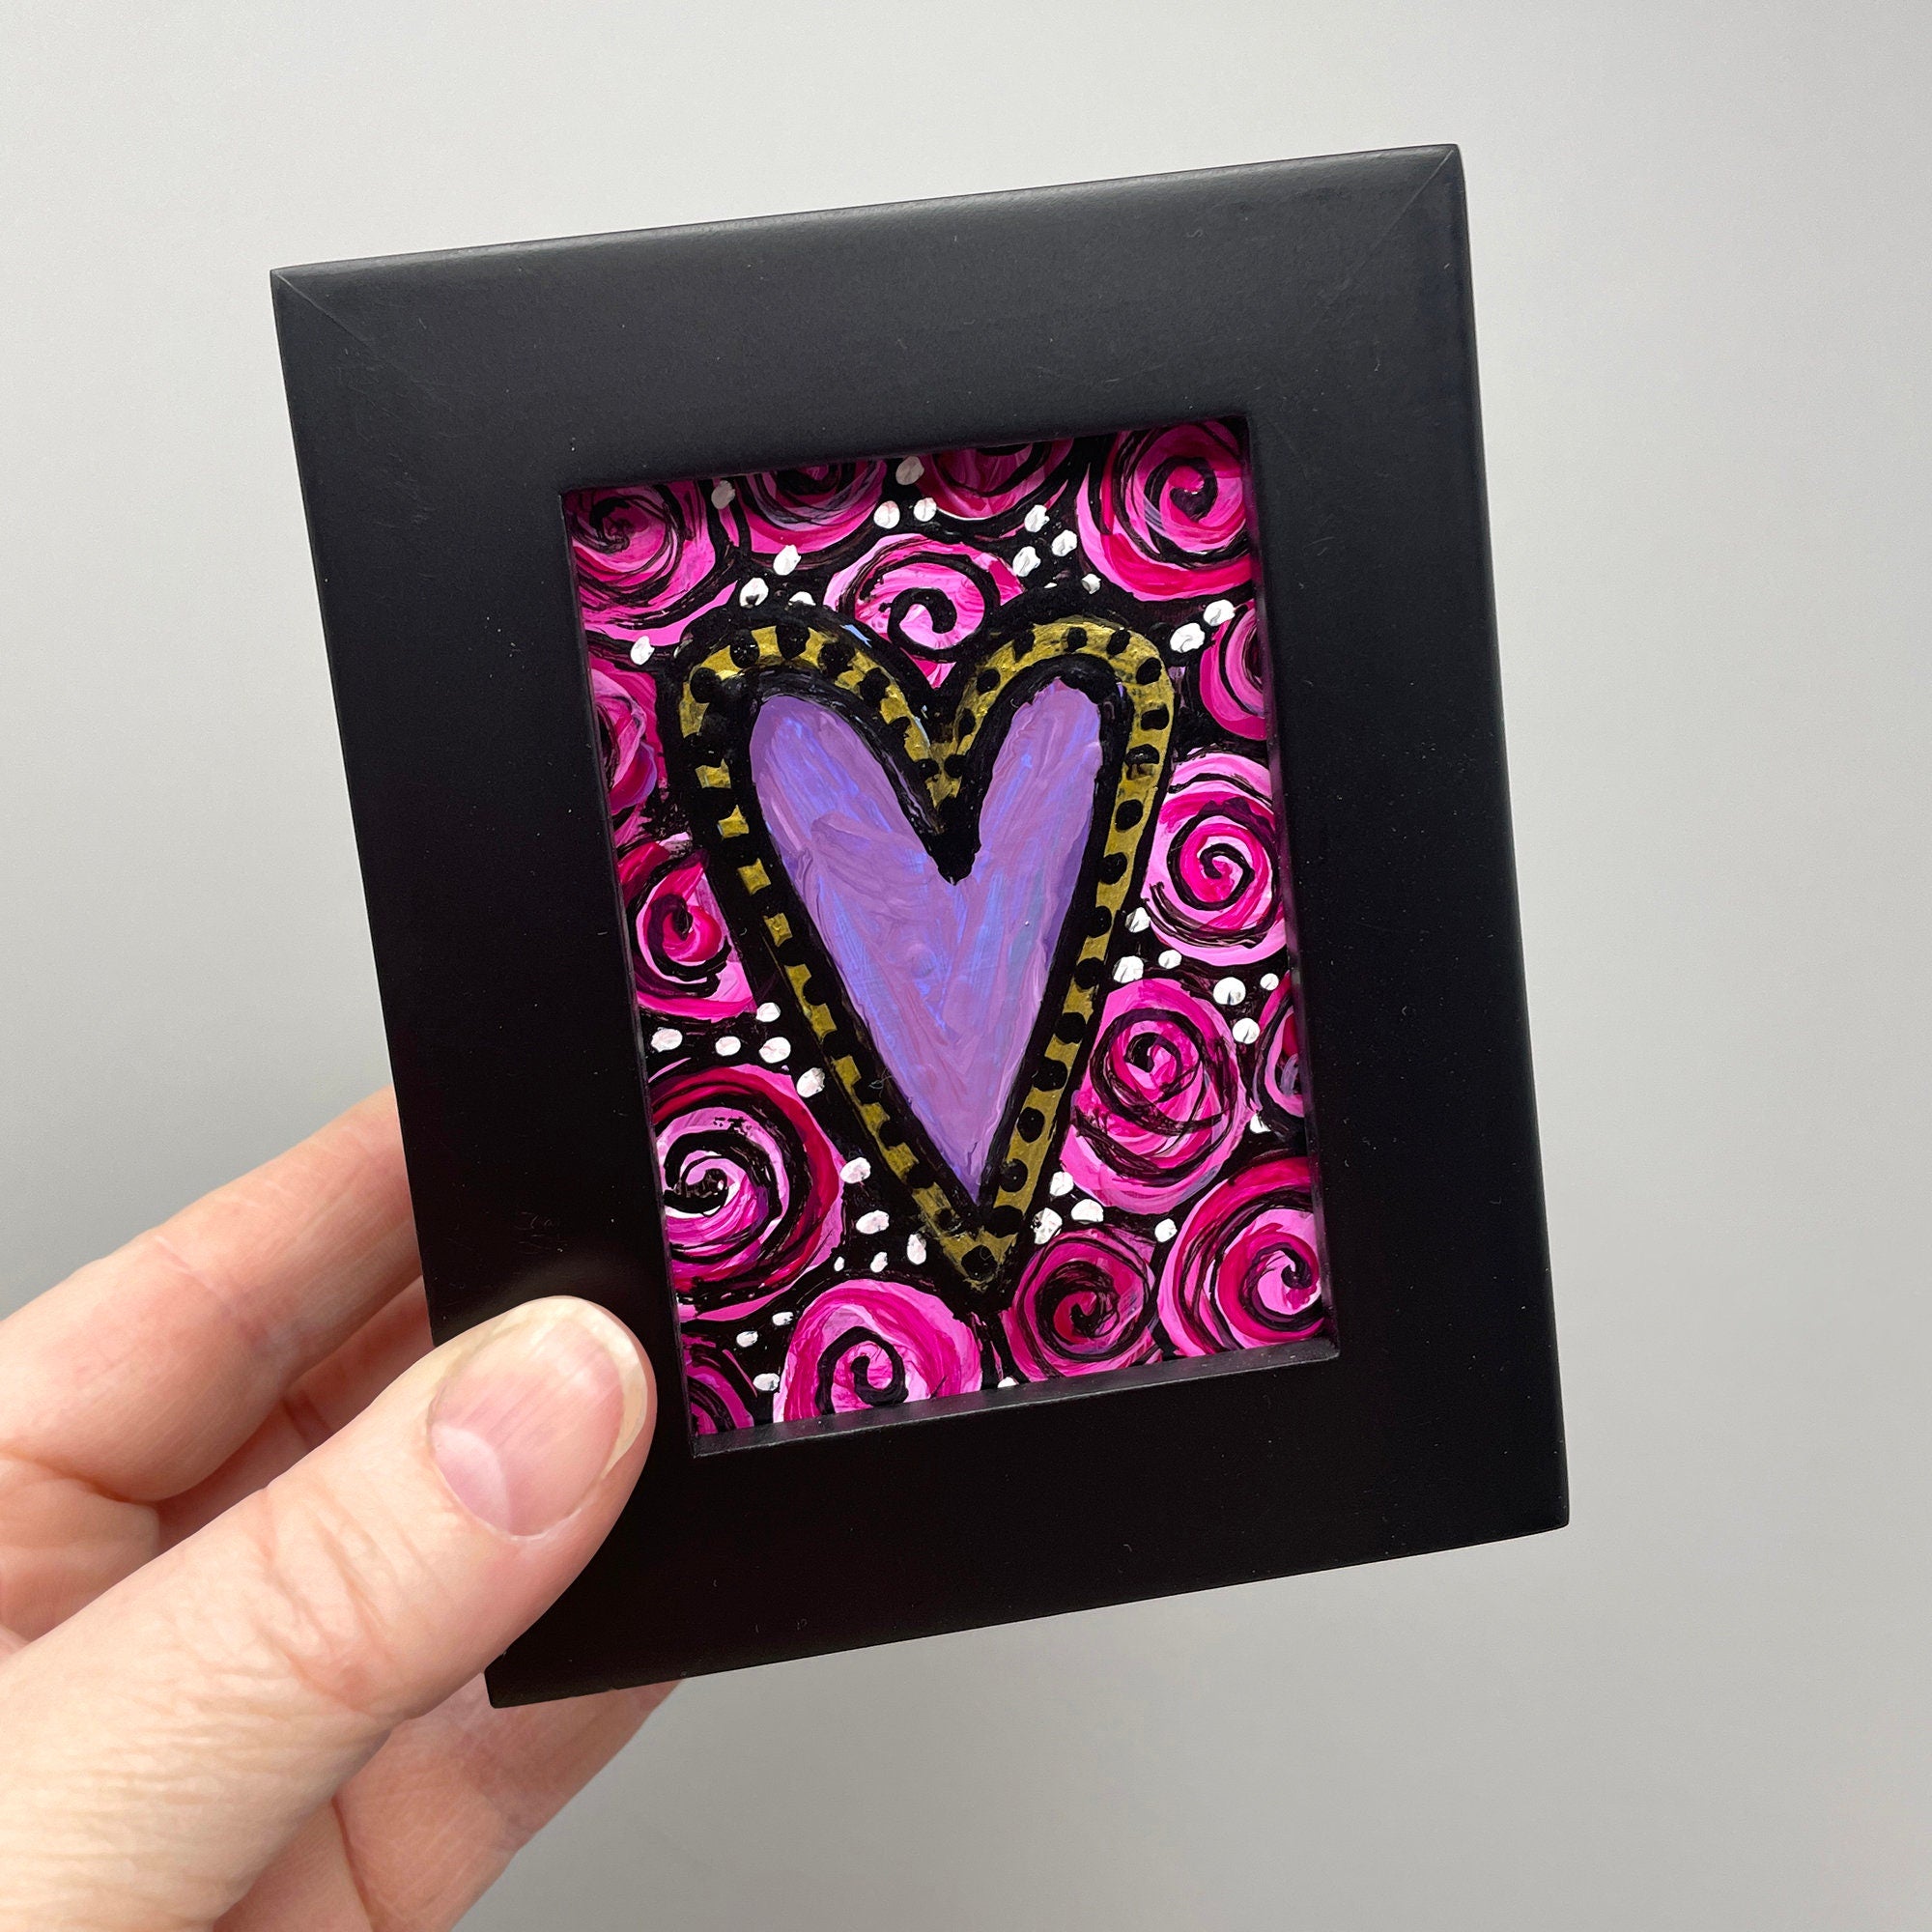 Framed Rose Heart Mini Painting - Framed ACEO - Artist Trading Card - Valentine's Day or Anniversary Gift